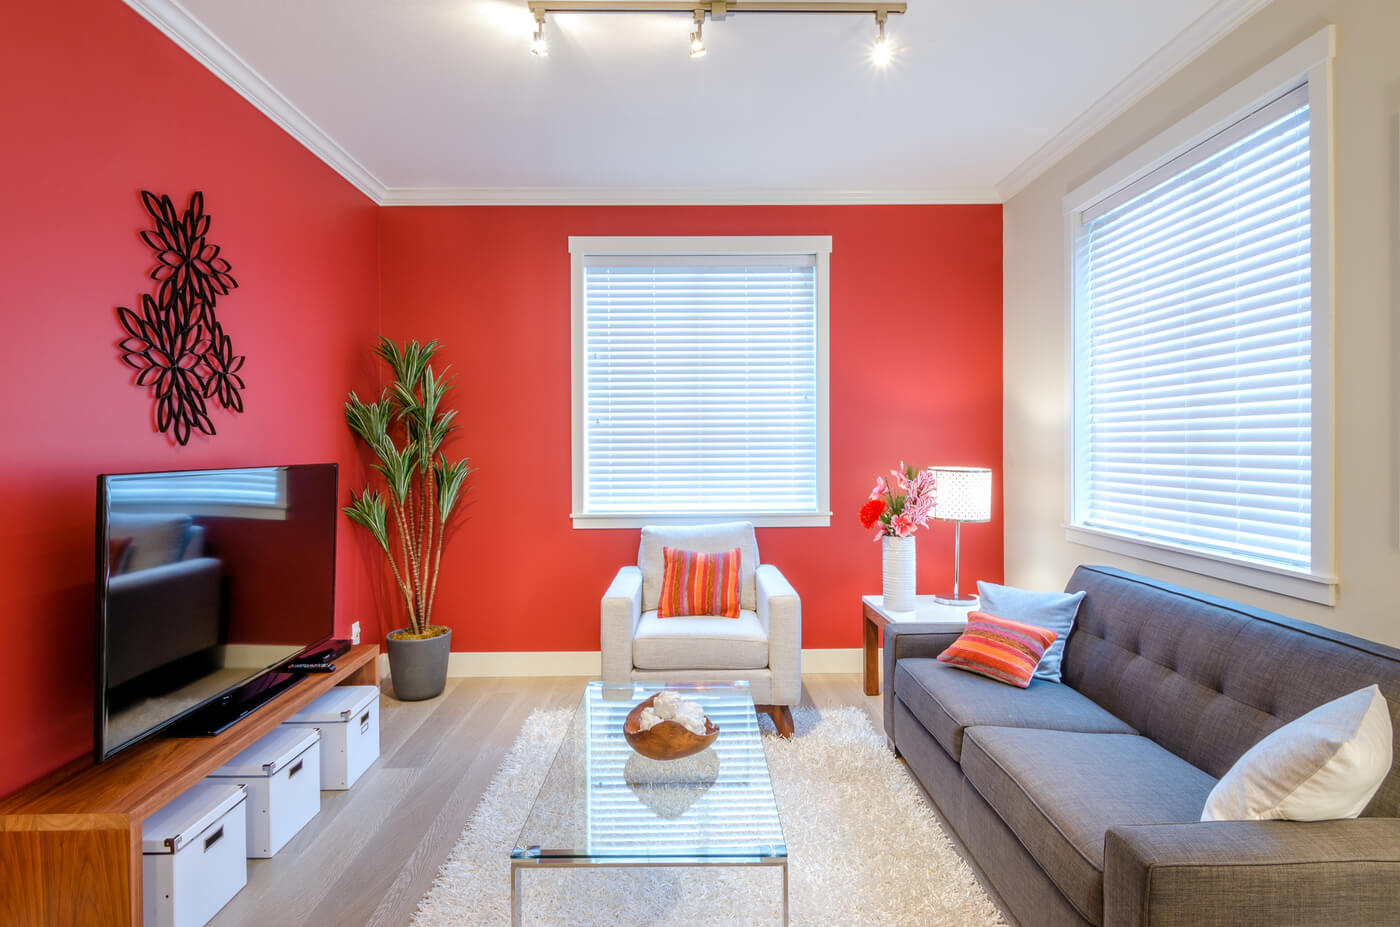 The different applications of the color red in decoration